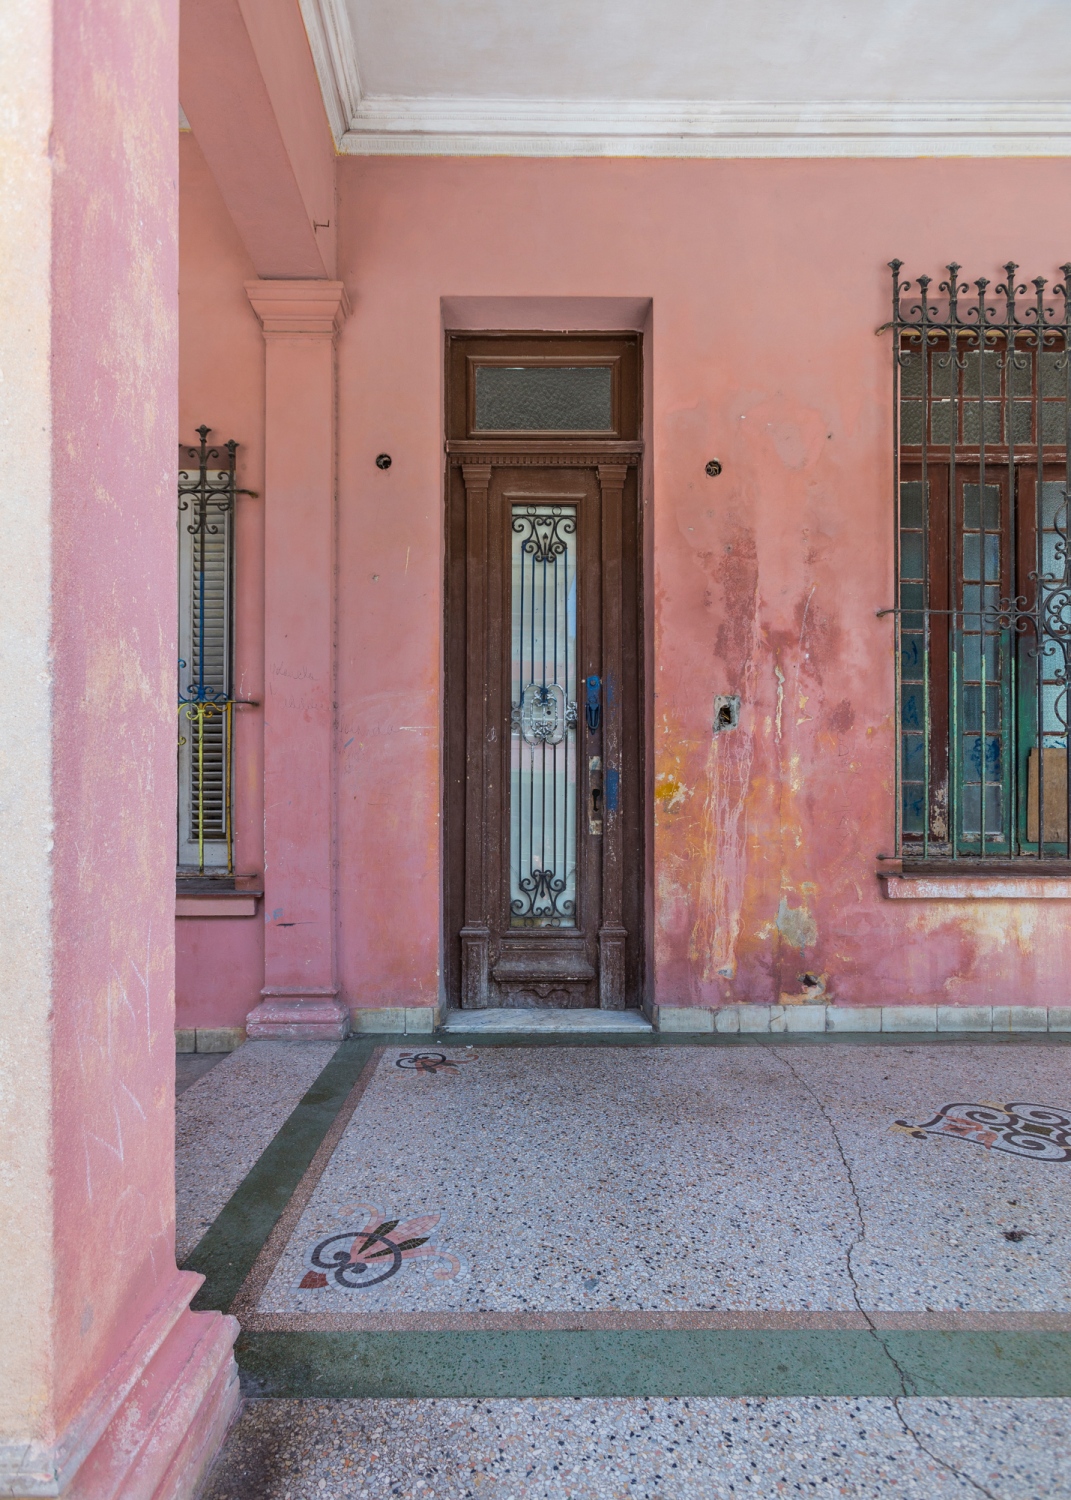 Photographing Cuba: My Myth, My Reality - The
front door of Luz House, where my mother&rsquo;s family lived. I have many
photographs...